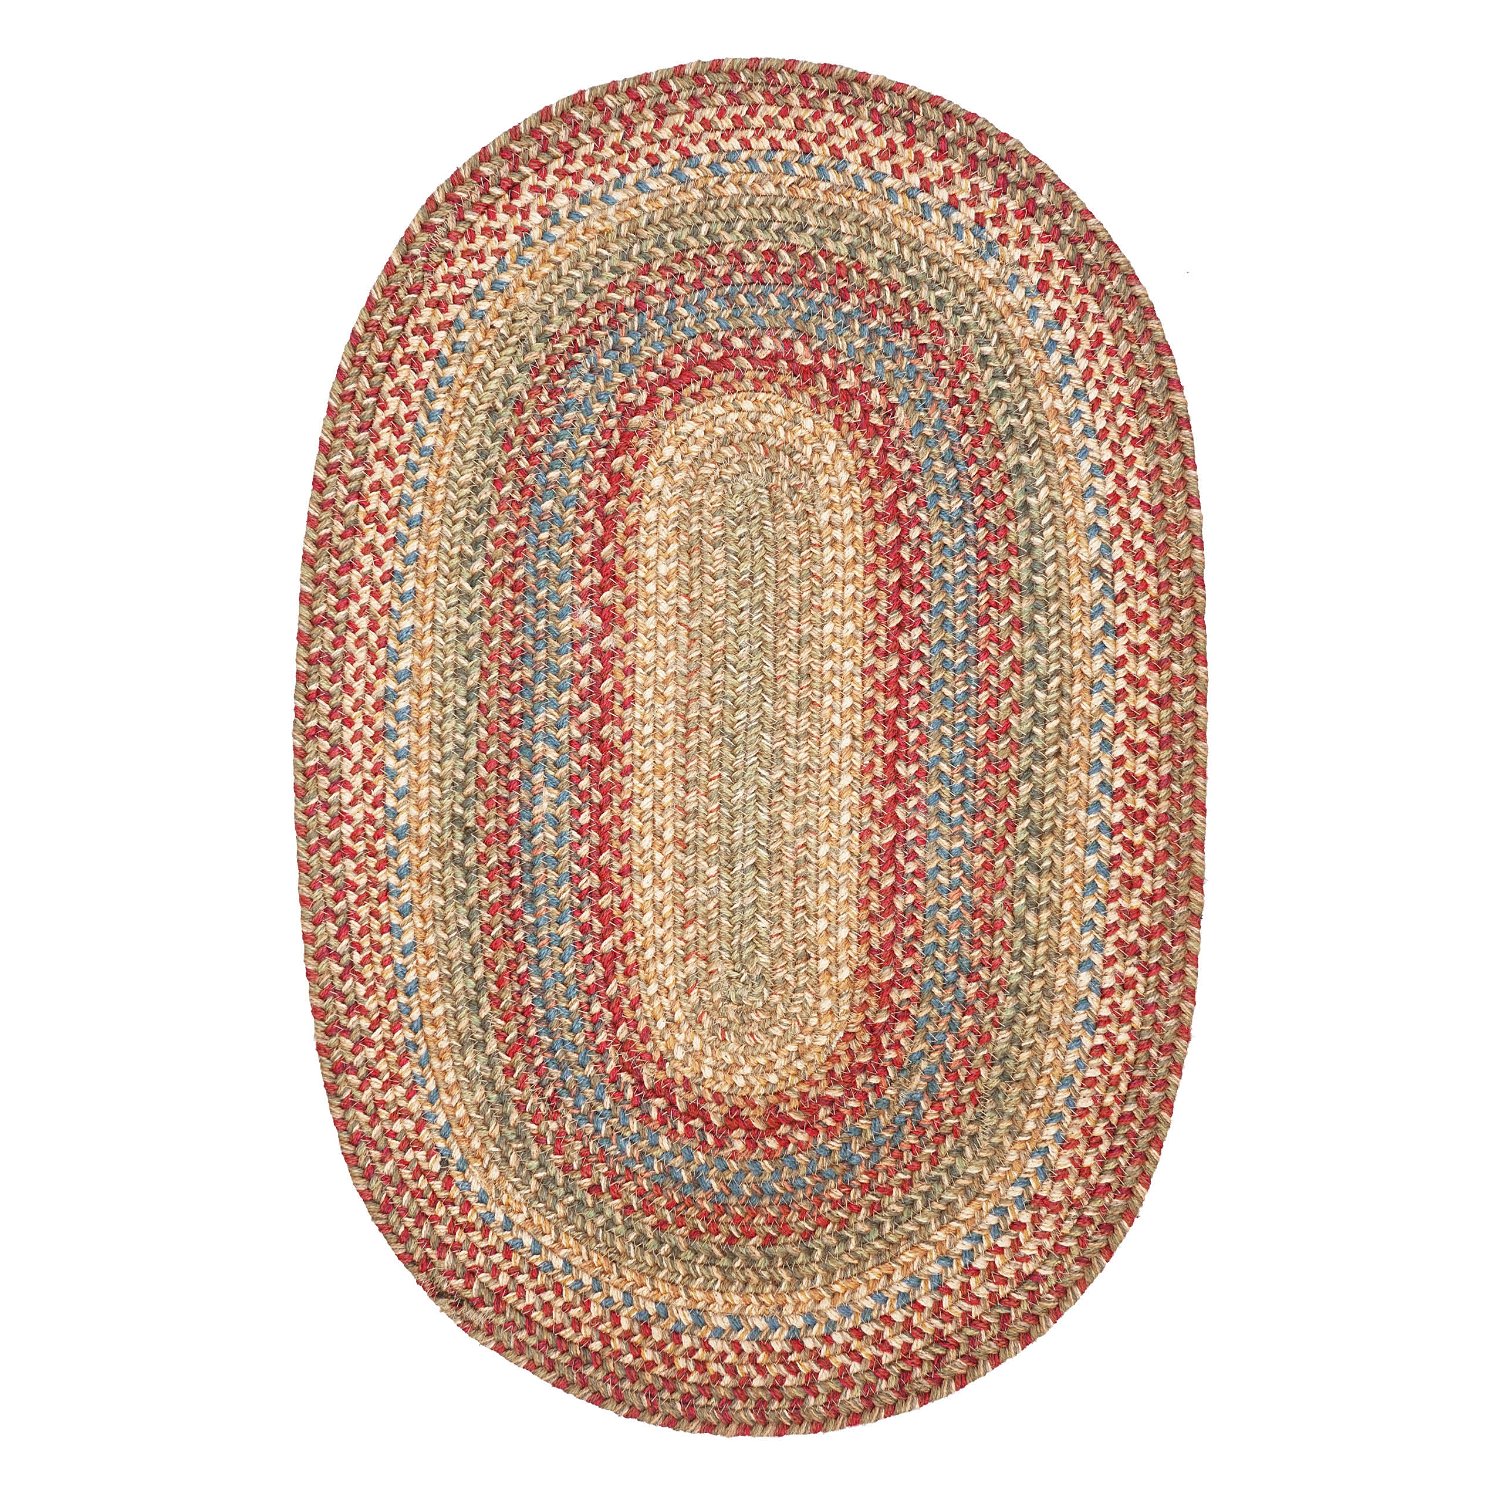 Homespice Decor - 20 x 30 Oval Chester Jute Braided Rug: Area Rugs